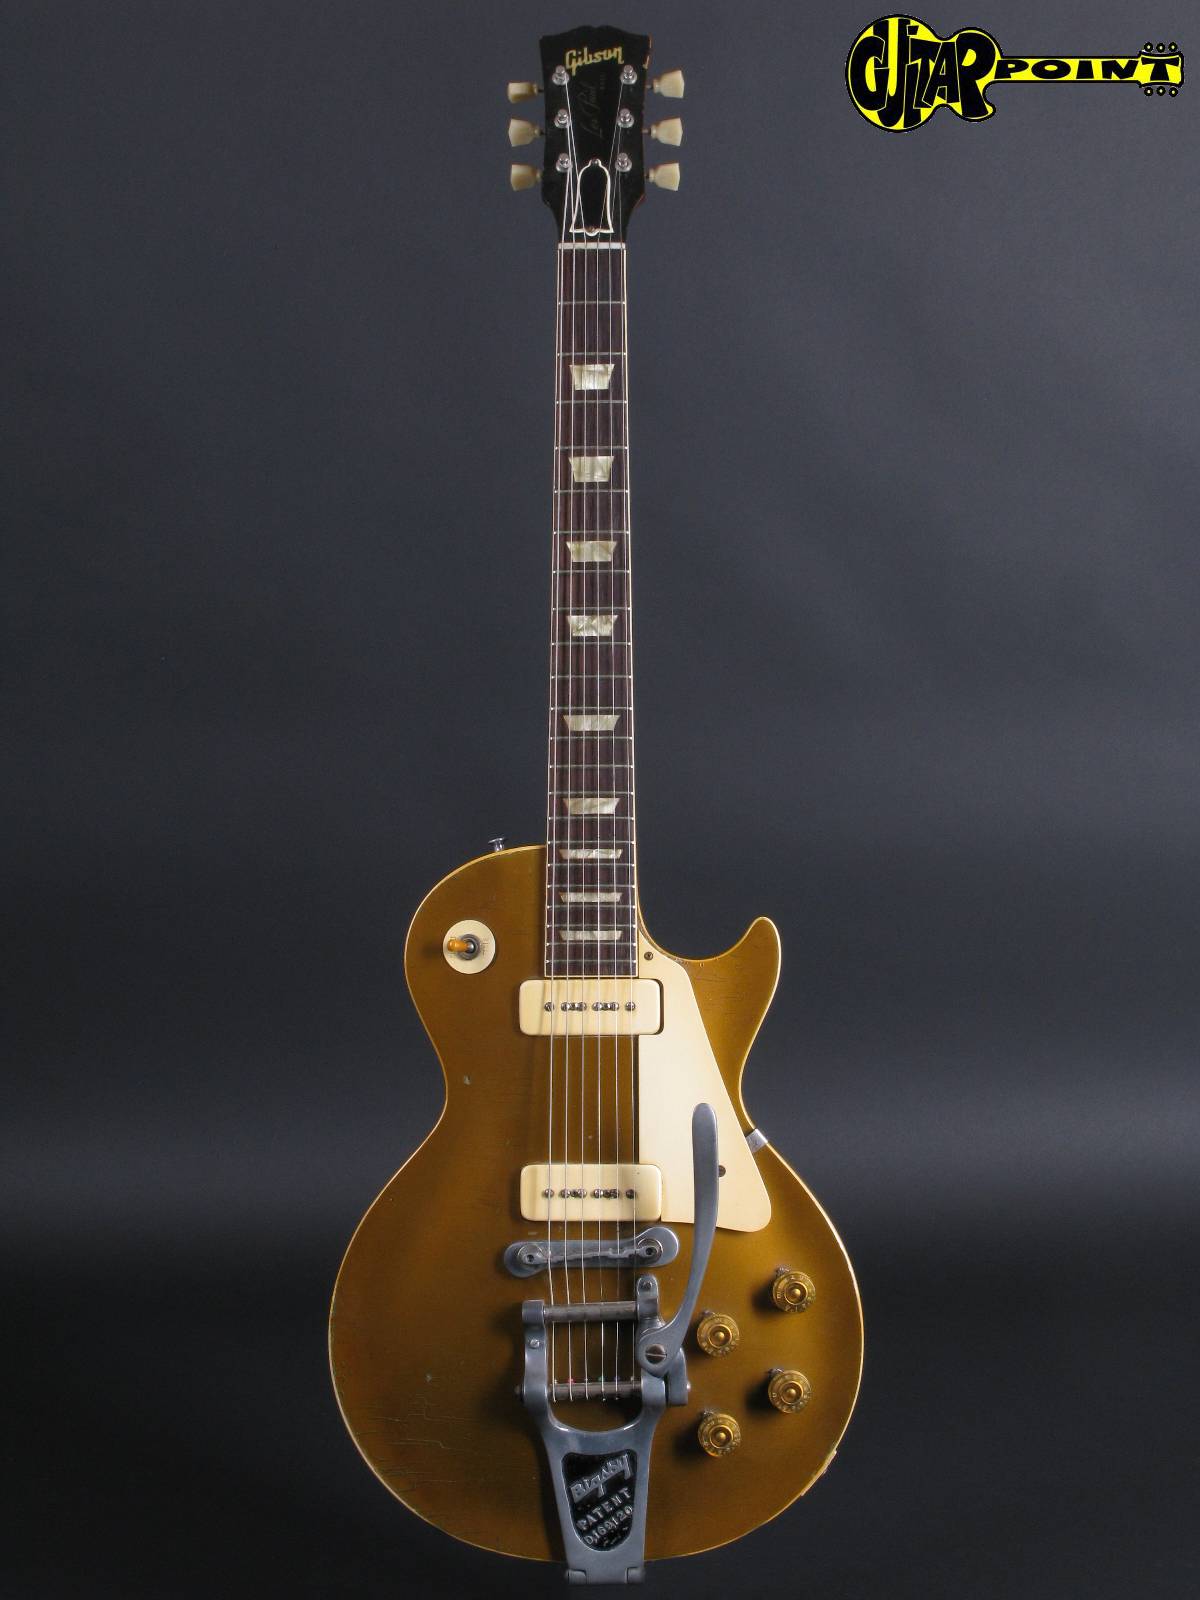 Gibson Les Paul Gold Top | Stripped and naked: My 1972 